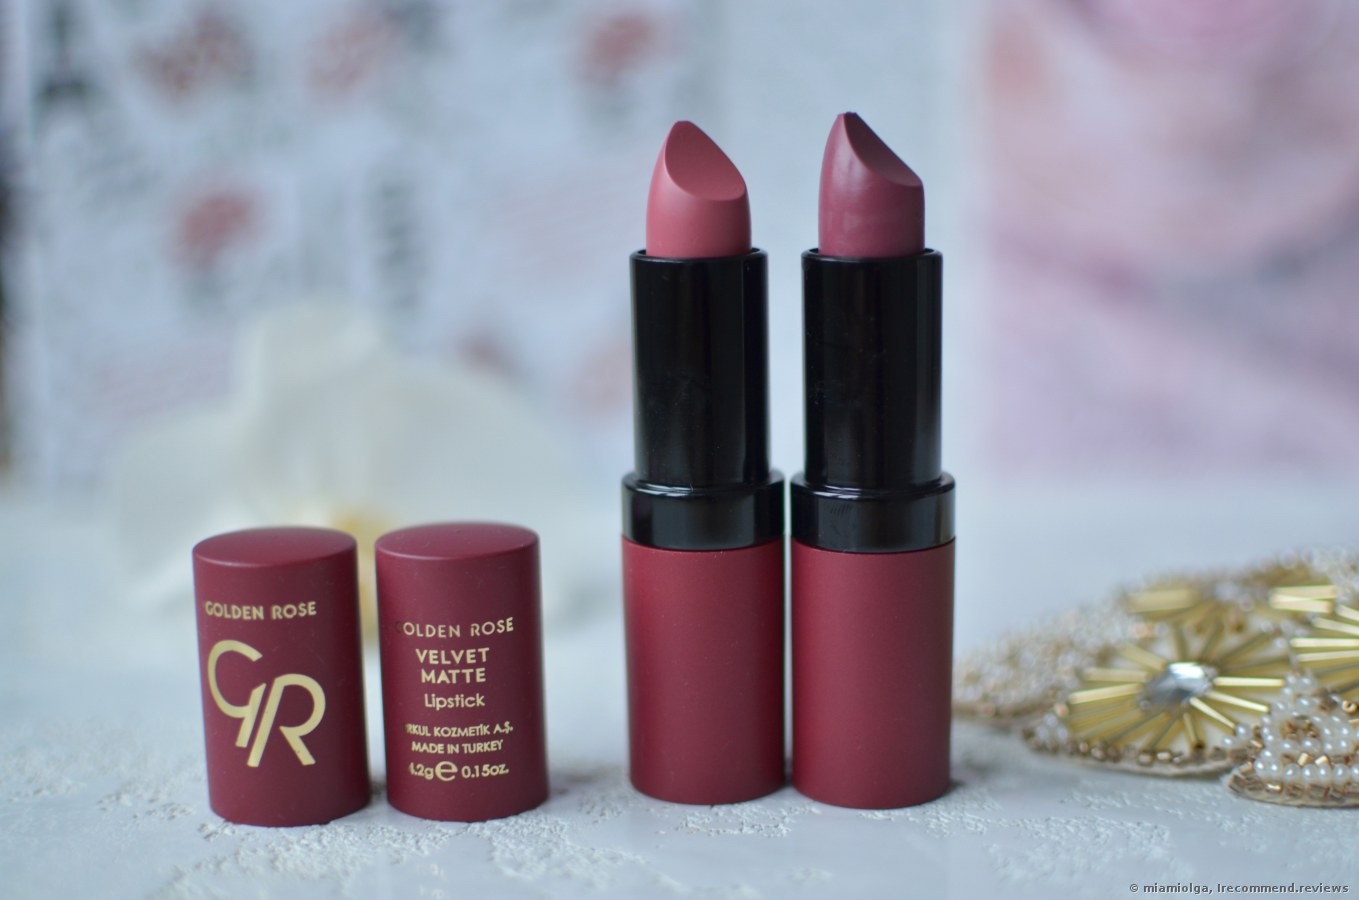 Plantkunde Paragraaf Wacht even Golden Rose Velvet Matte Lipstick - «Not the jewel in the crown, but still  quite a worthy lipstick! Swatches of the shades 02 and 32.» | Consumer  reviews